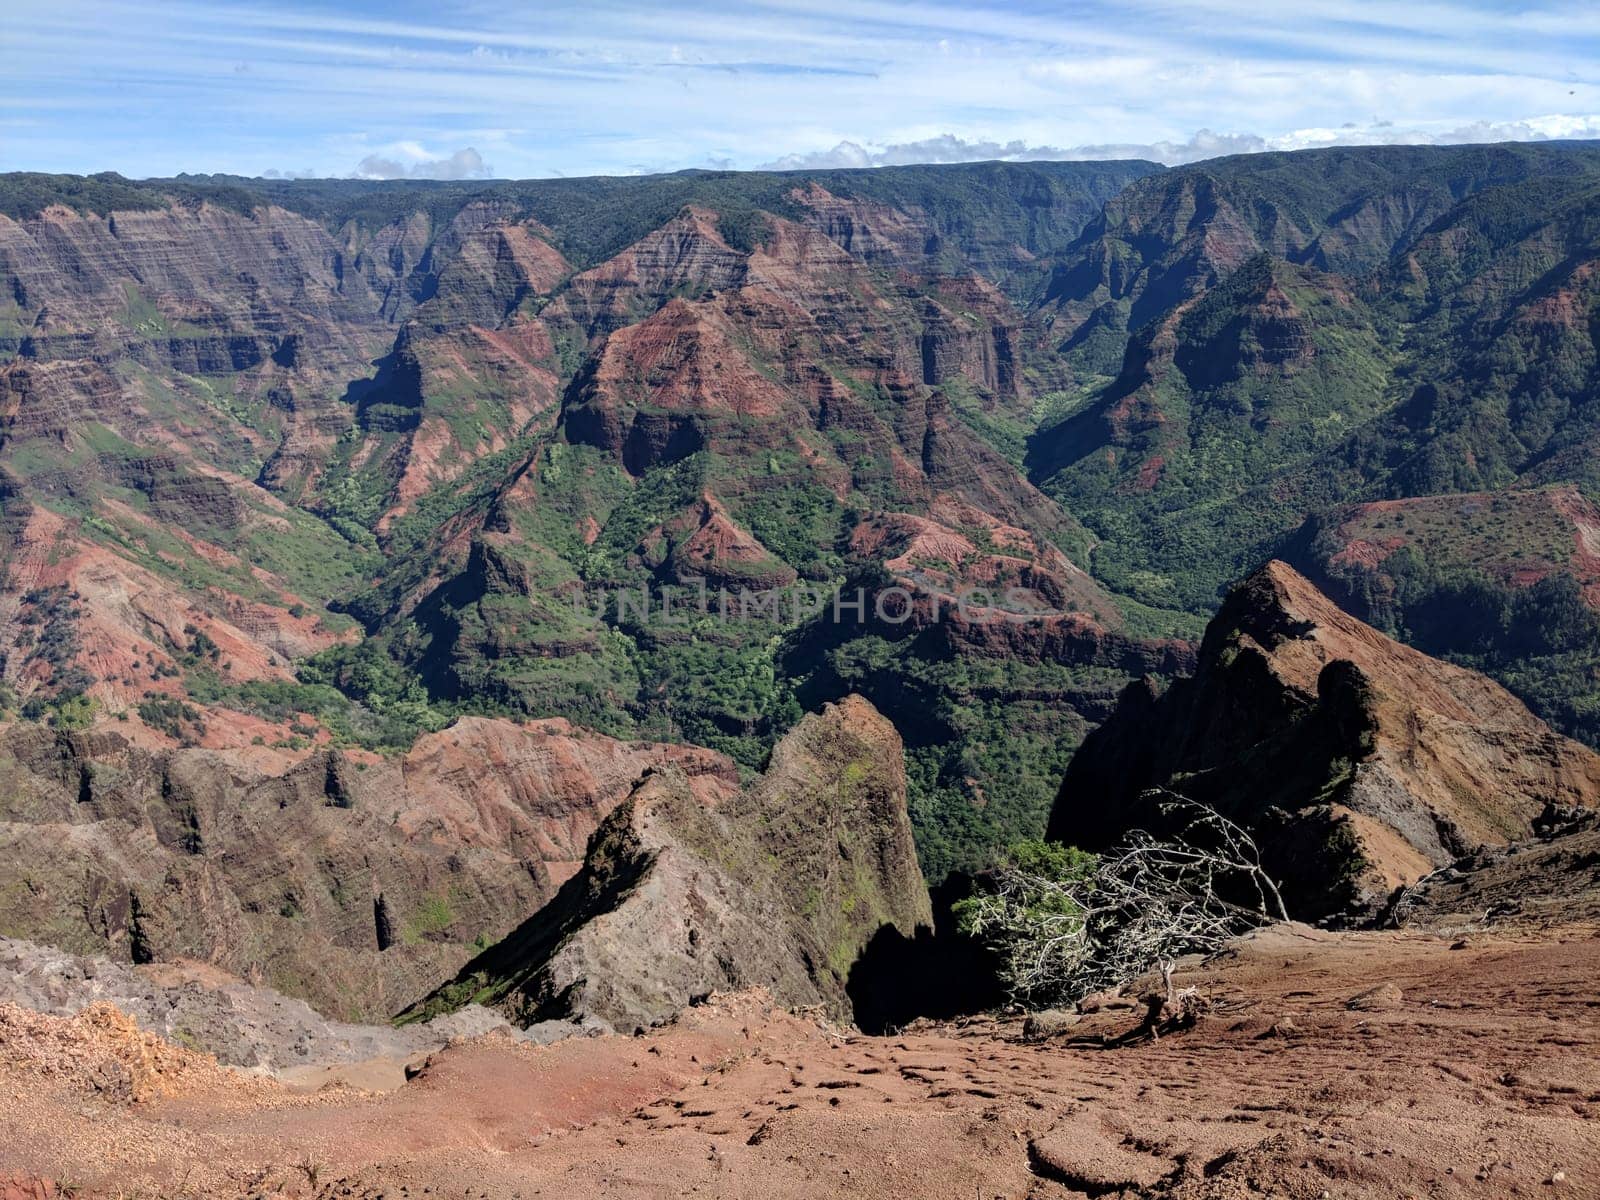 Waimea Canyon in 2017, showing the deep valley and the river running through it. The photo shows the contrast between the red and green colors of the canyon walls and the blue sky and the white clouds. The photo is taken from a high angle, capturing the vastness and beauty of the canyon.